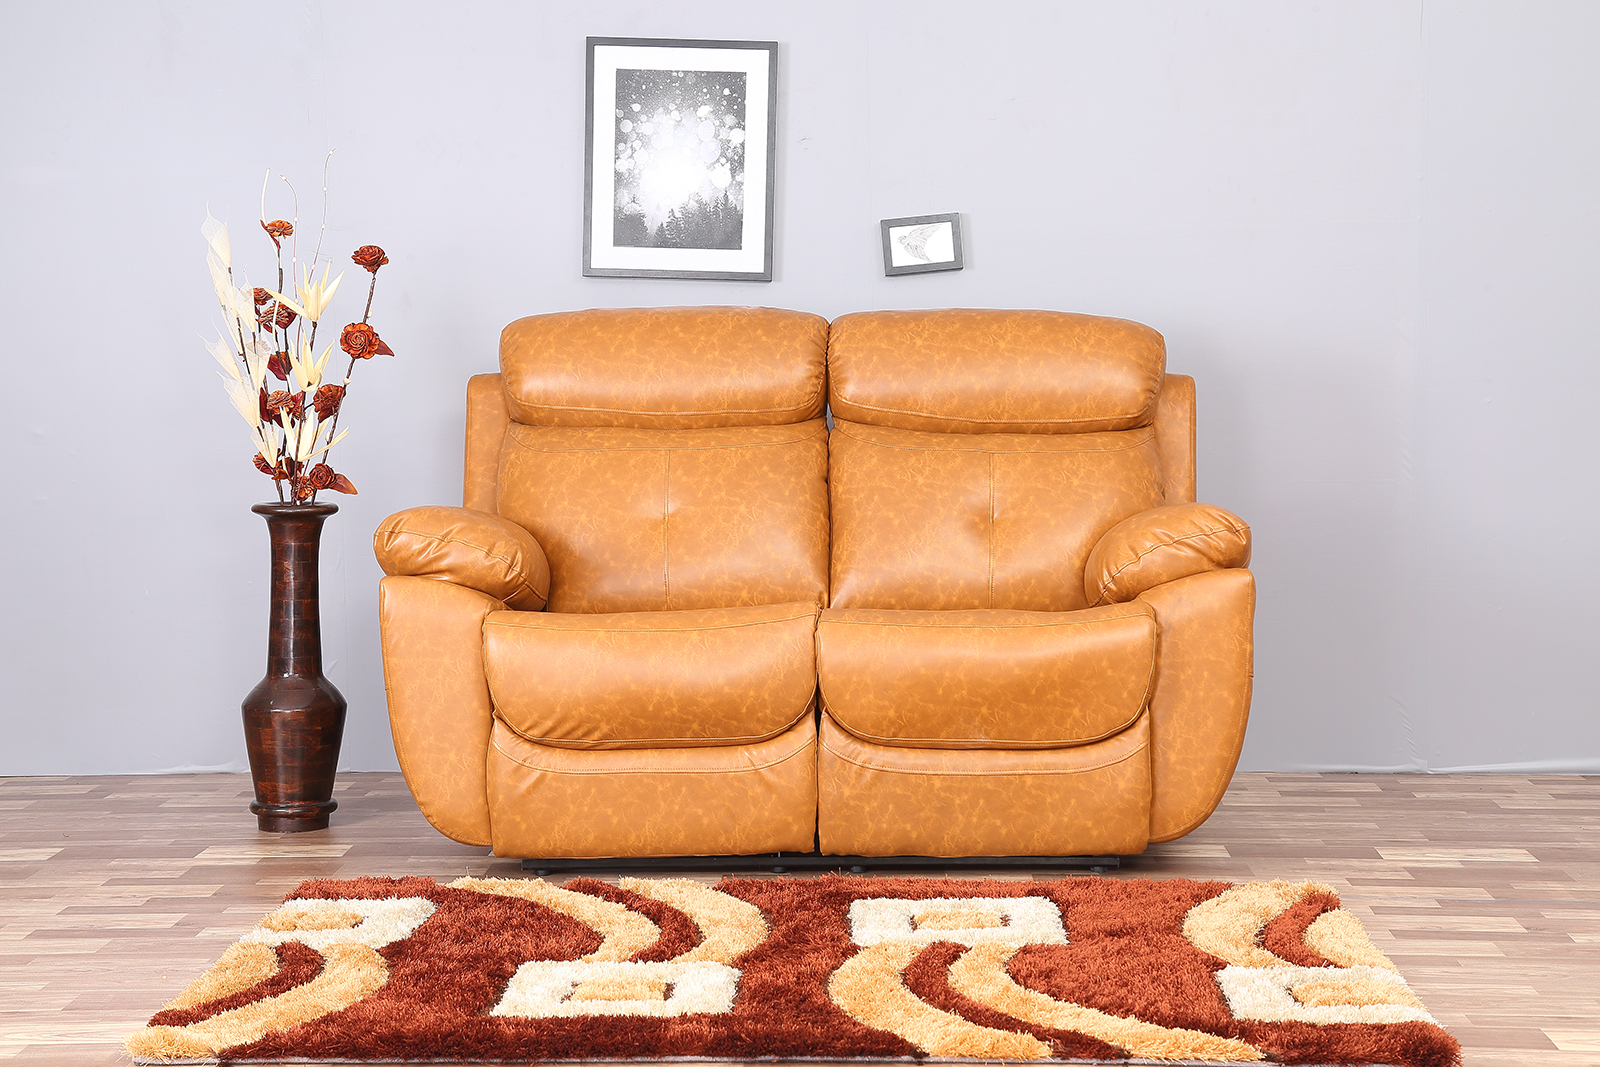 sofas for sale in hyderabad